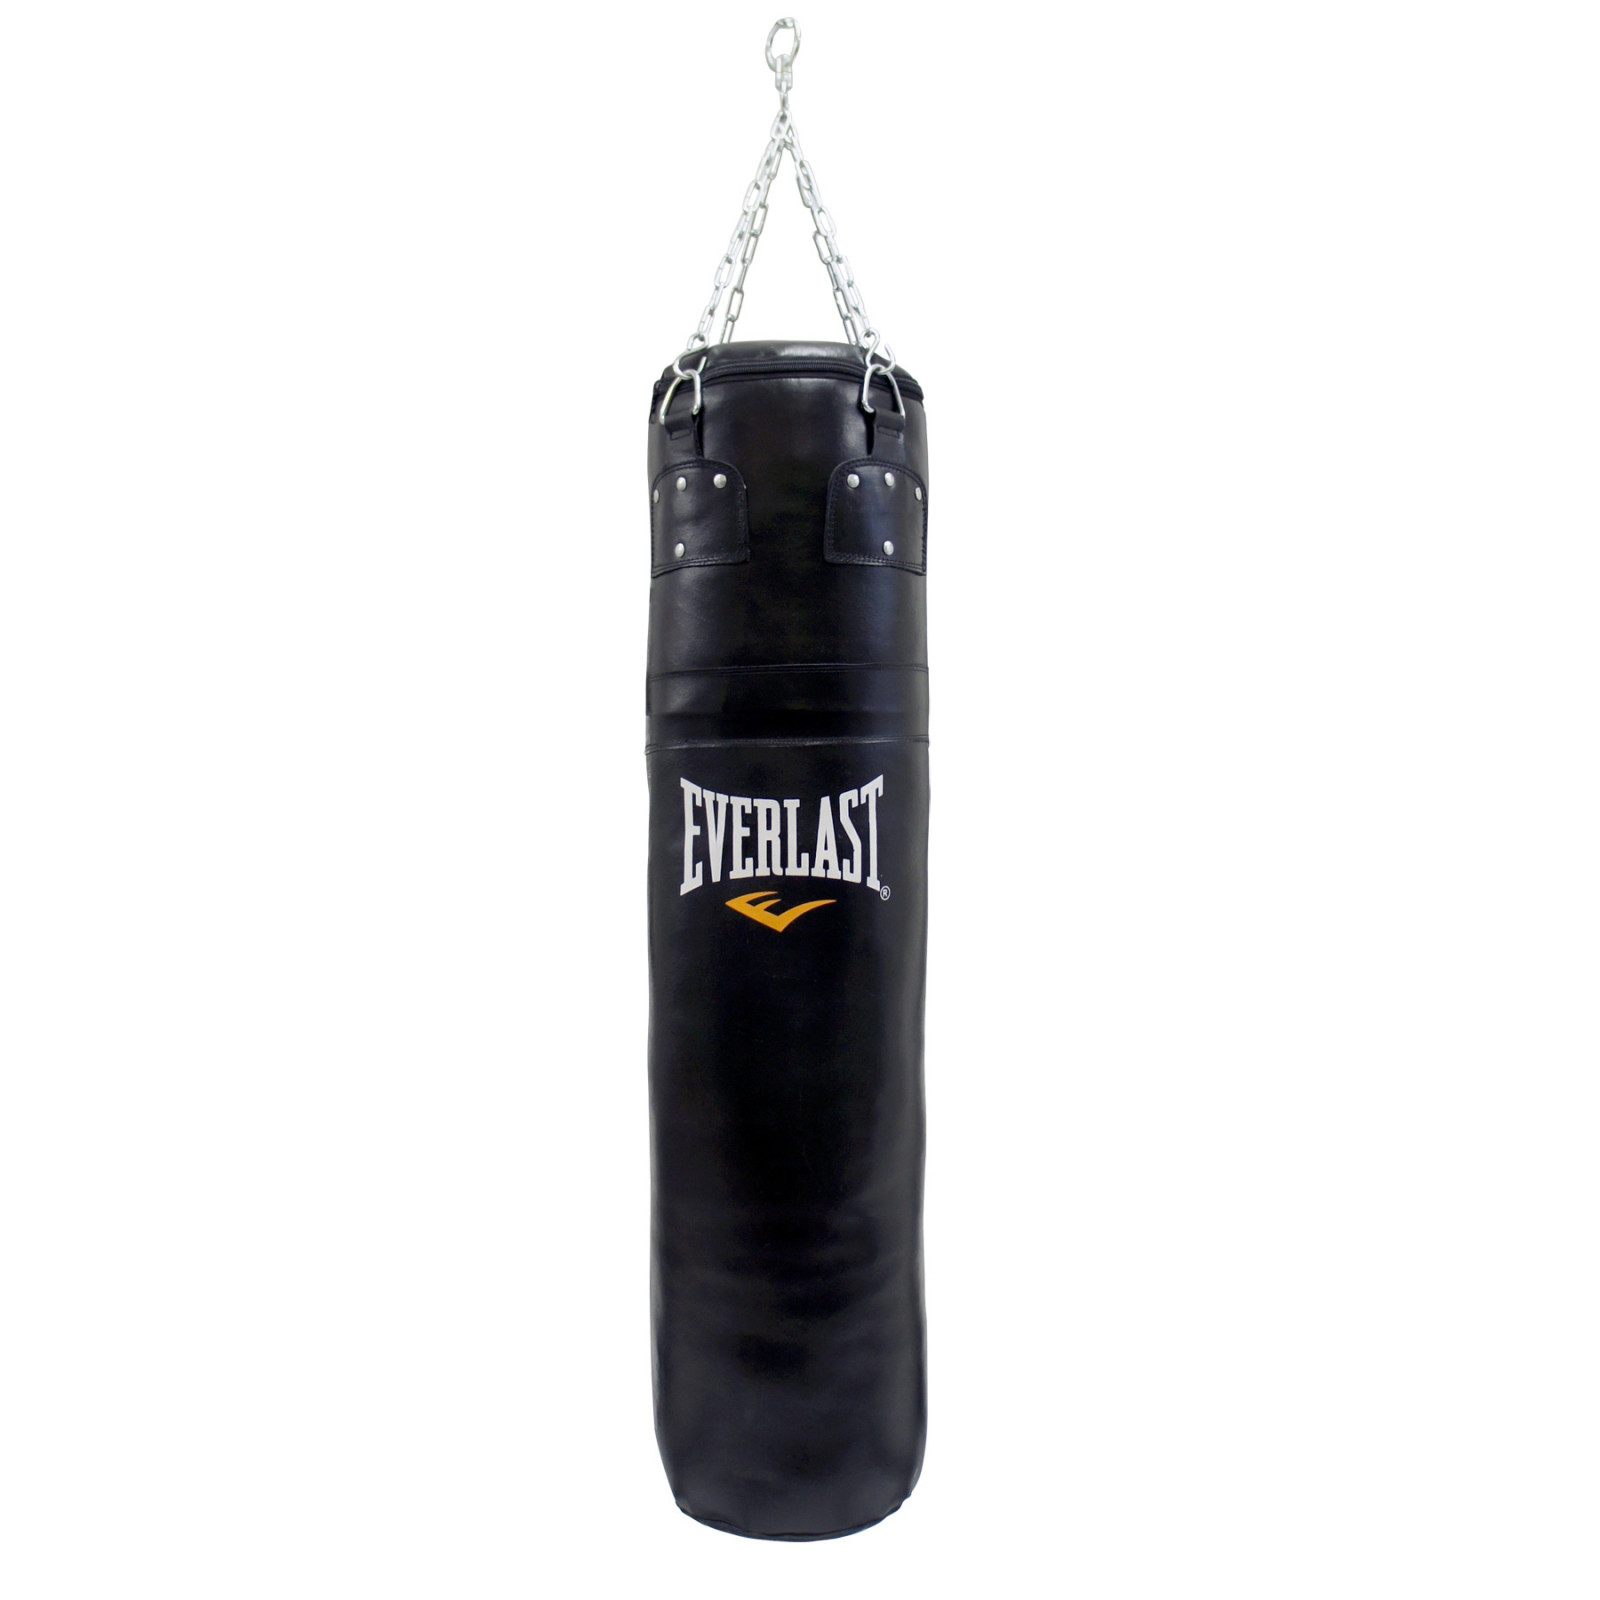 Everlast 4ft Leather Punch Bag - Shop Online - Powerhouse Fitness